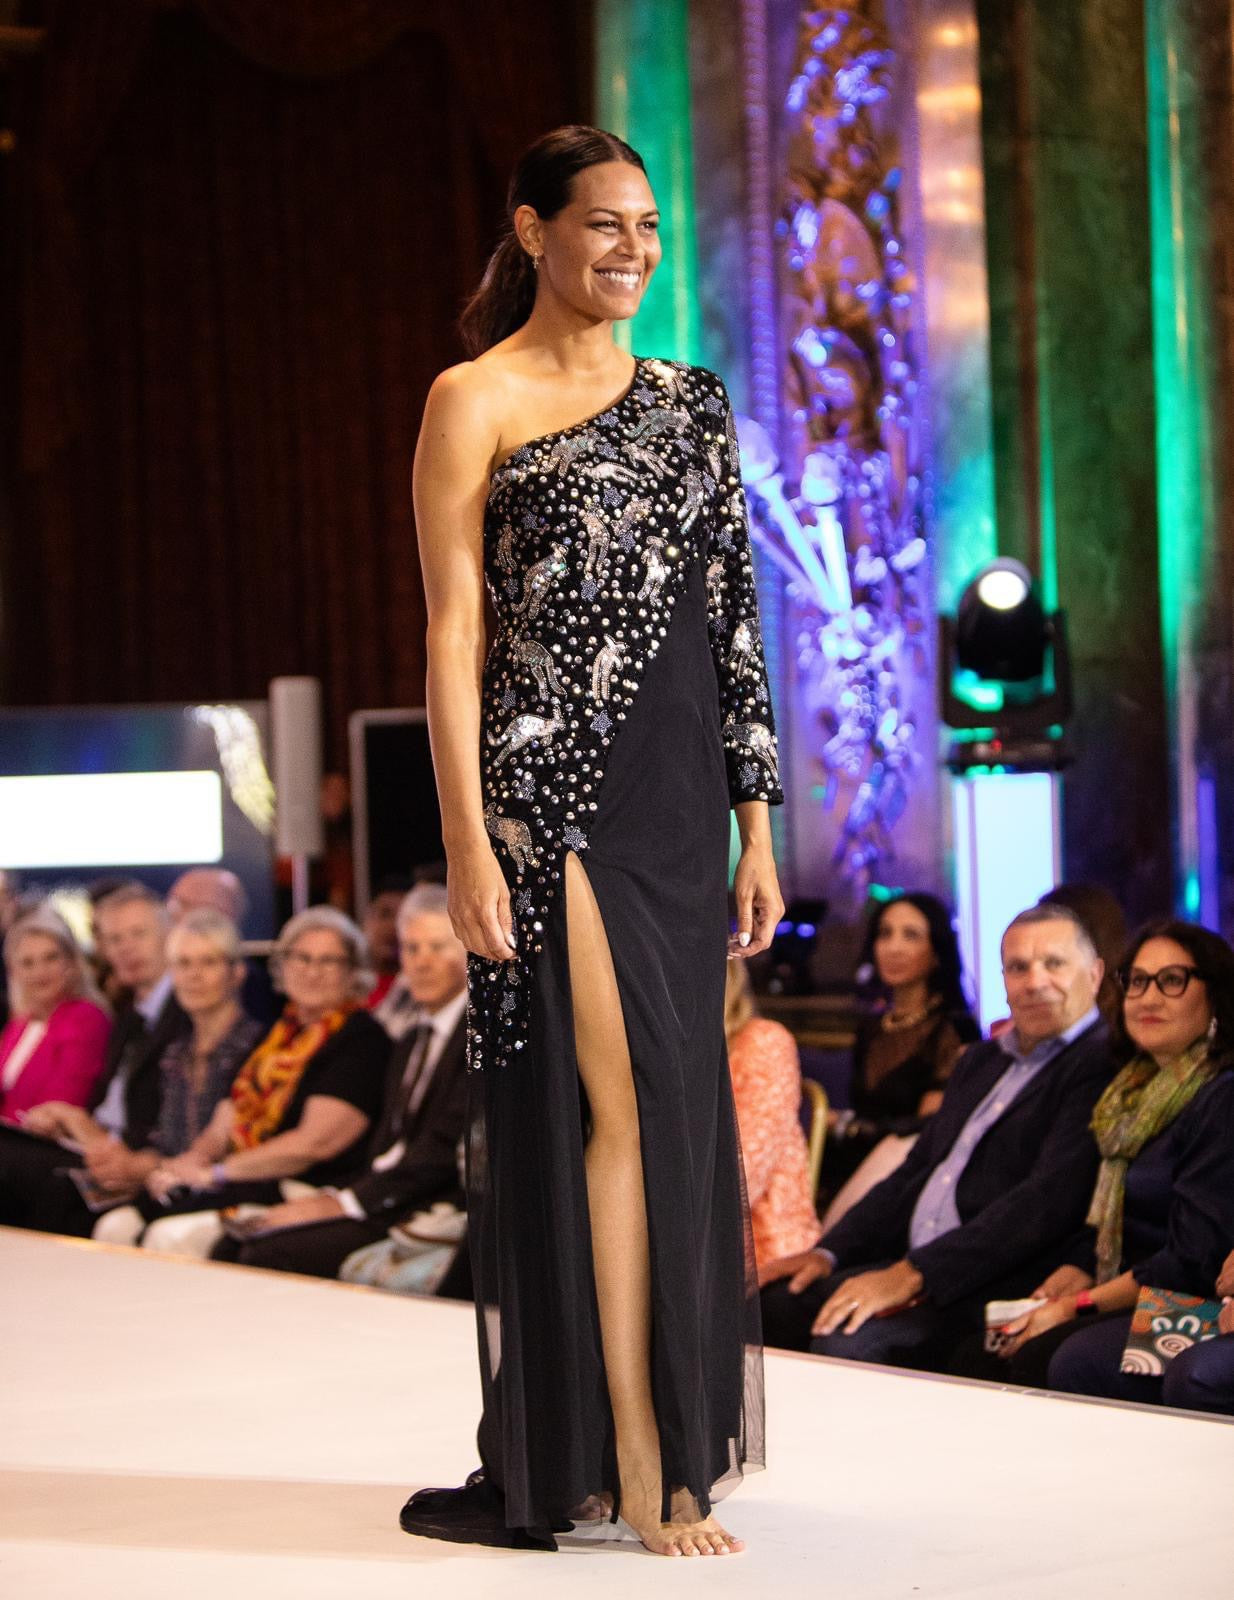 A Night to Remember: Australia's Indigenous Fashion & Art Event